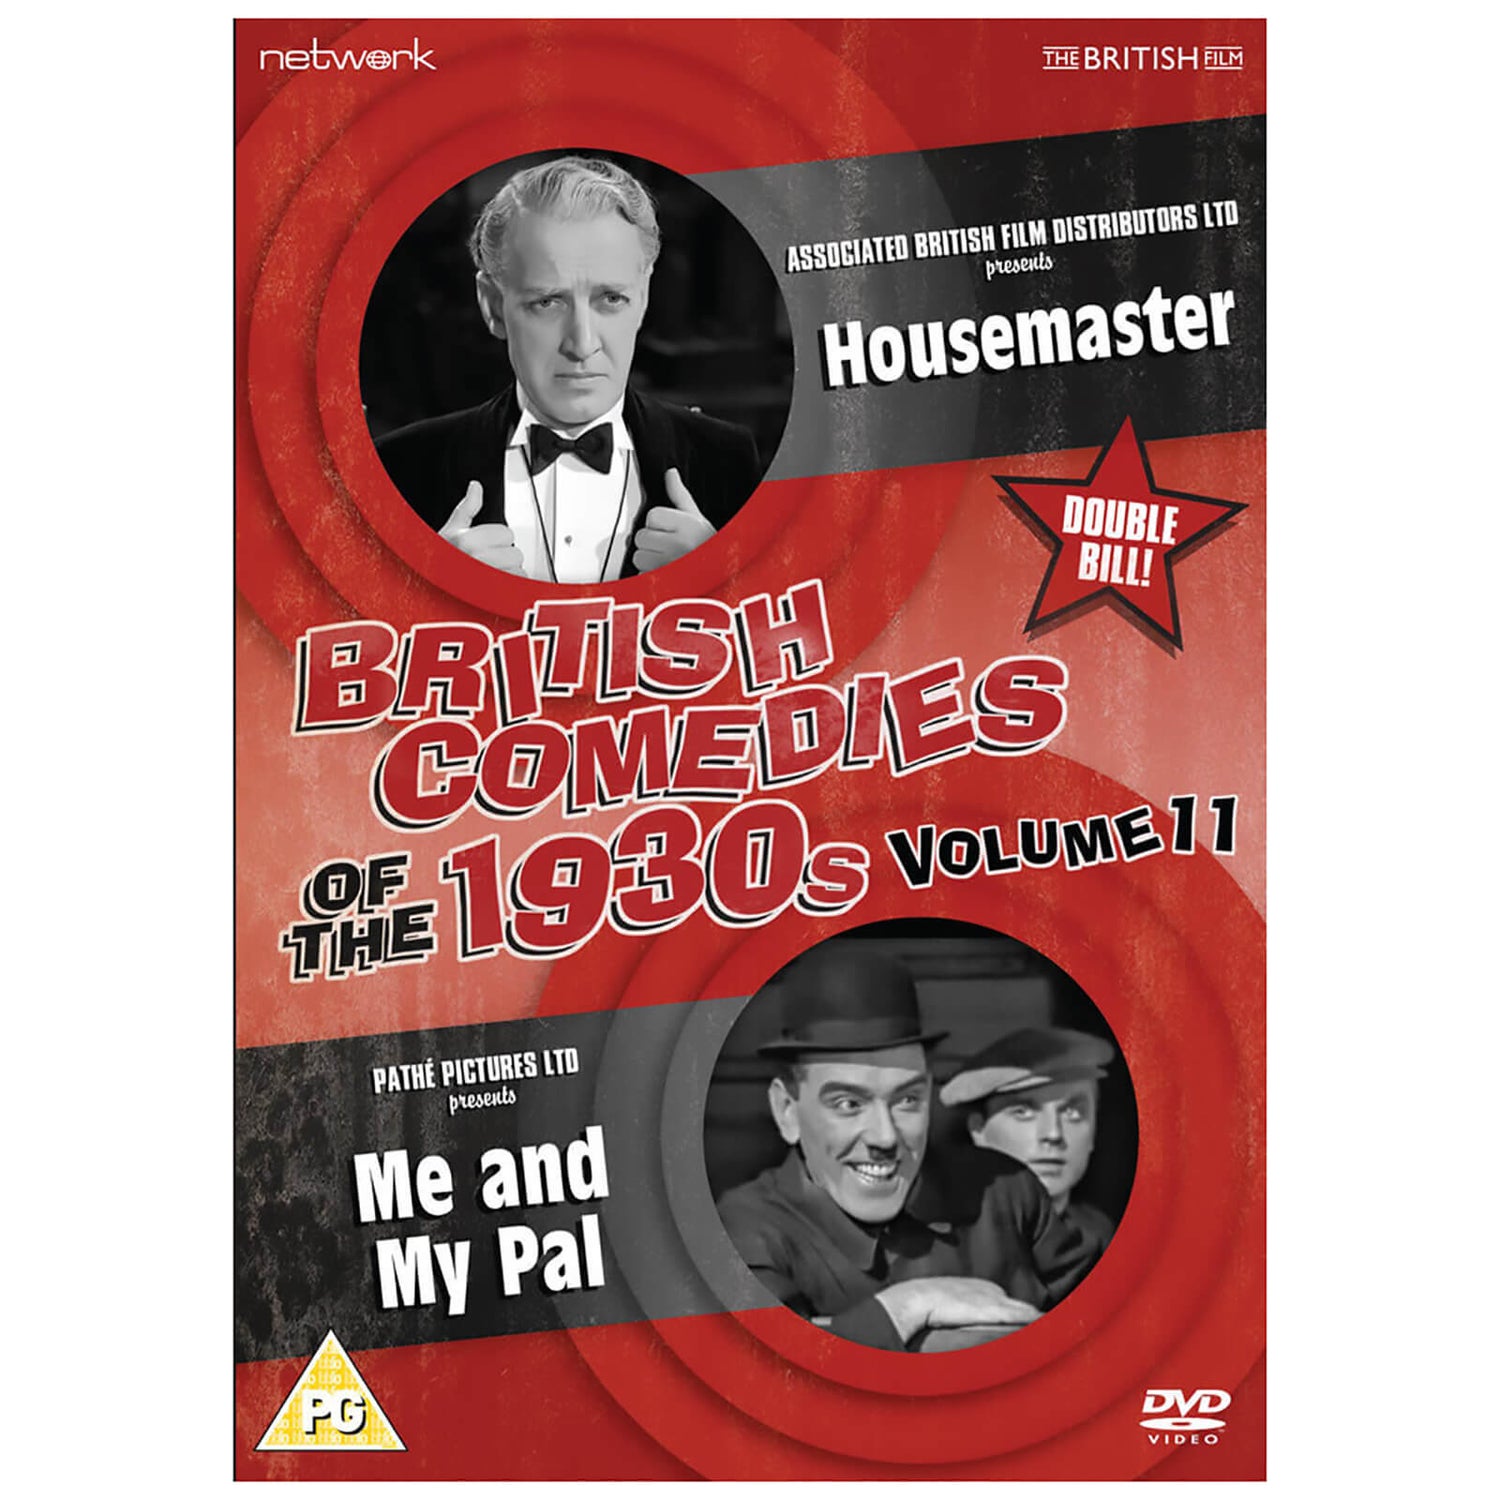 British Comedies of the 1930s Vol. 11: Housemaster/Me and My Pal